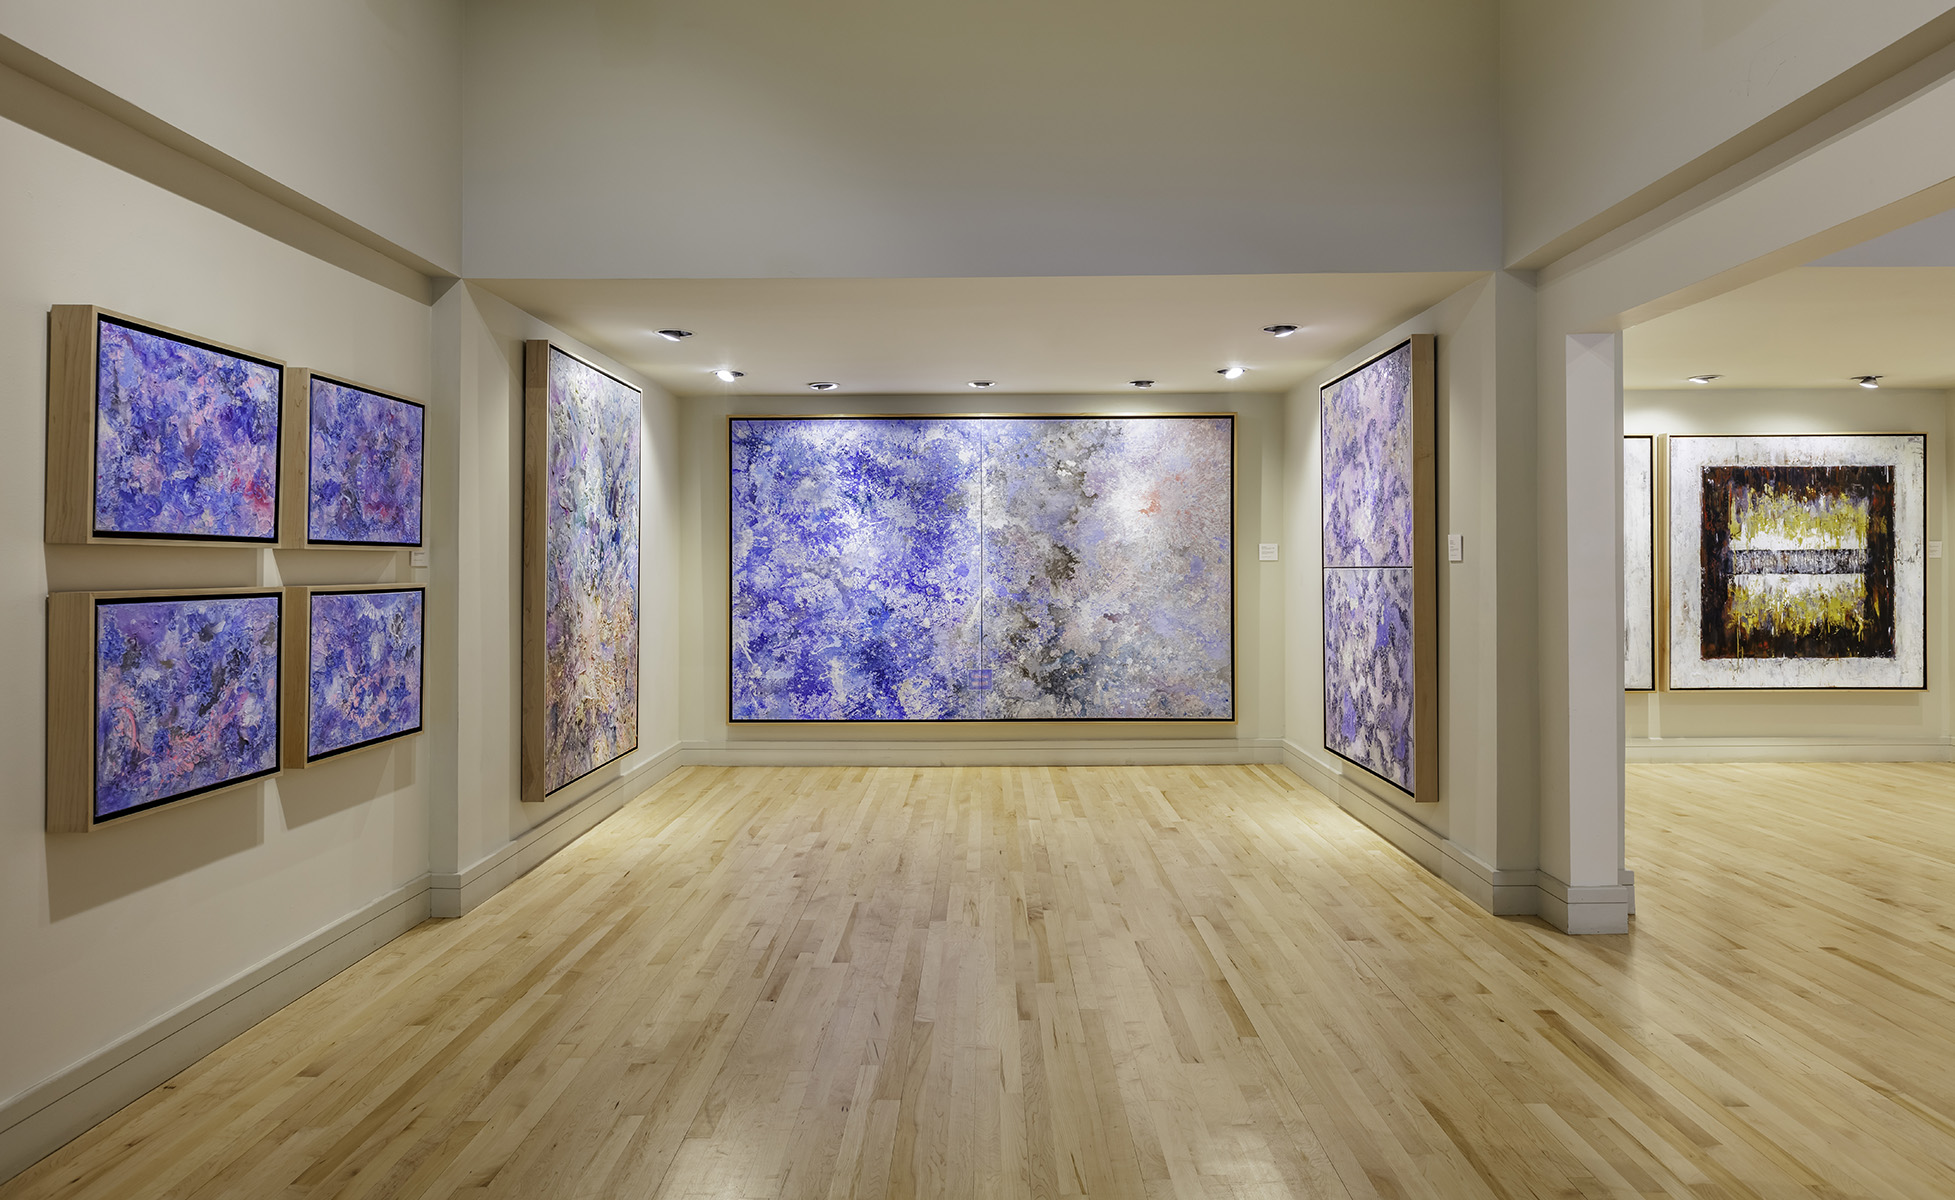  Photo: Kim Sargent Krutick’s solo show  Lyrical Abstraction  at the Coral Springs Museum of Art. 